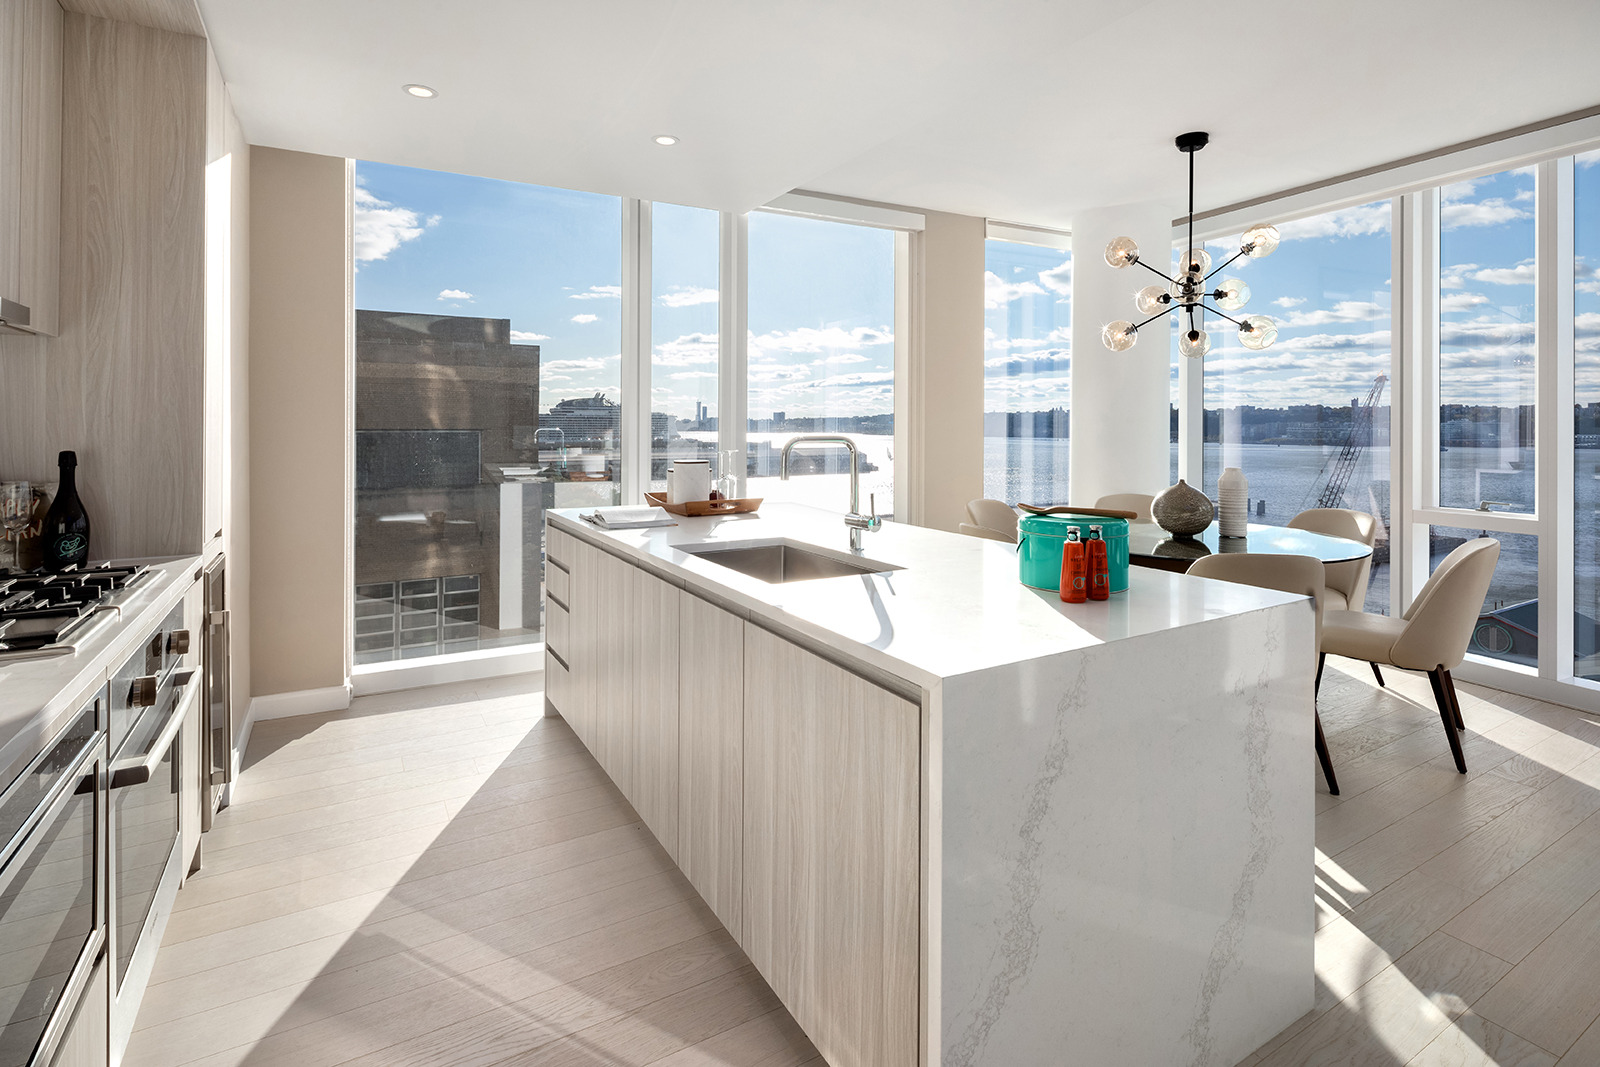 A bright, modern kitchen bathed in natural light with sleek white cabinetry and countertops, featuring a spacious island and an elegant dining area, all overlooking a scenic waterside view.